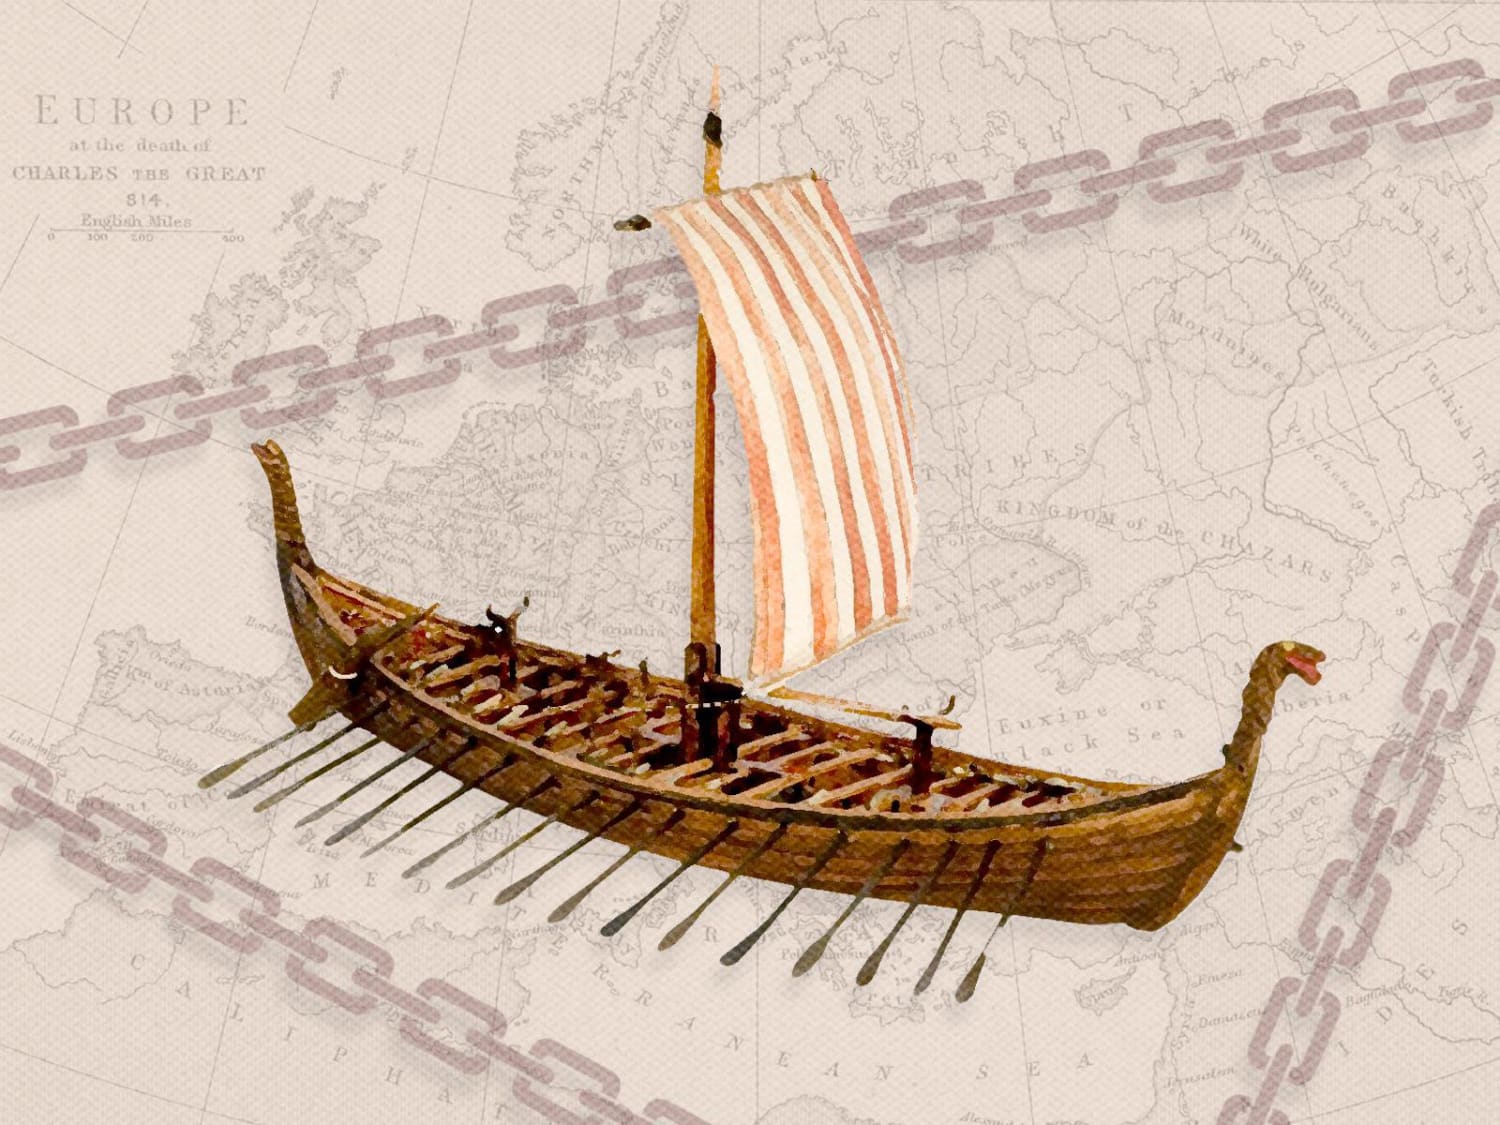 The Little-Known Role of Slavery in Viking Society